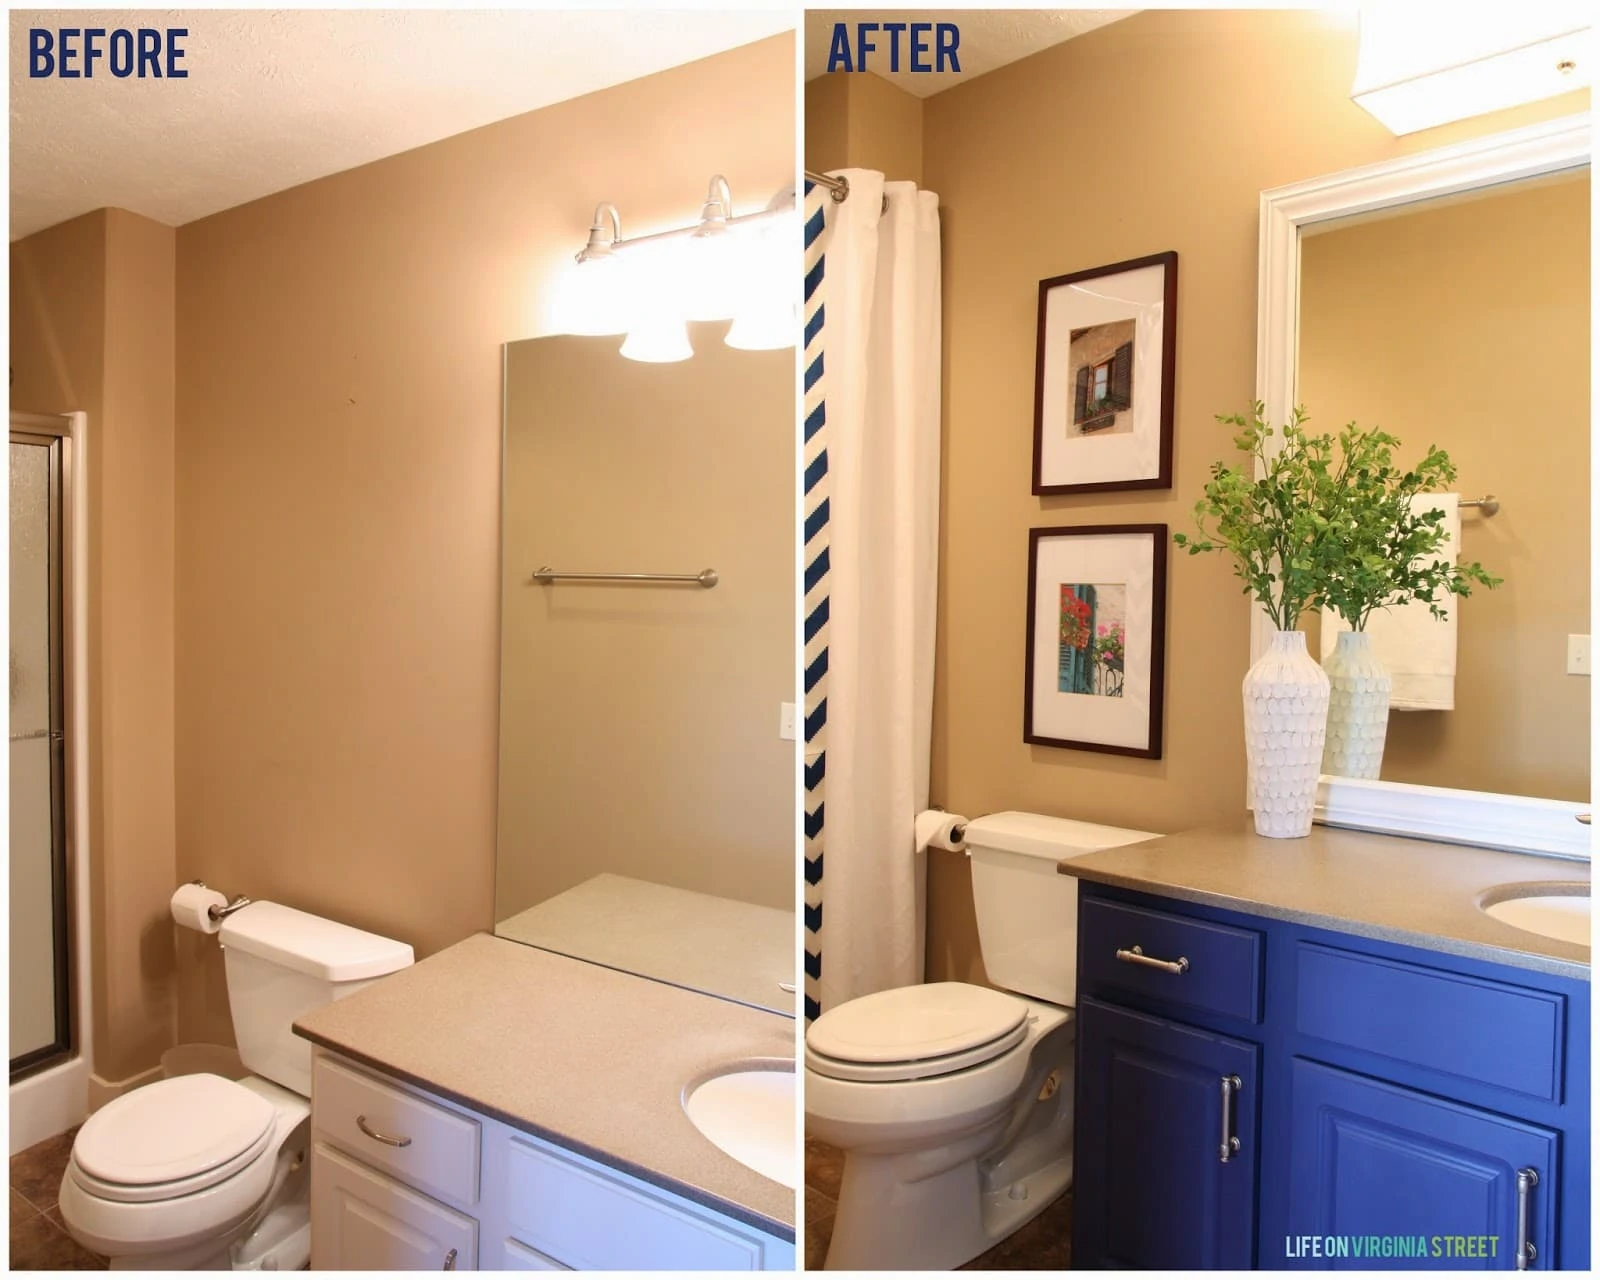 Bathroom Organization Ideas (Before and After Photos) - Living Locurto